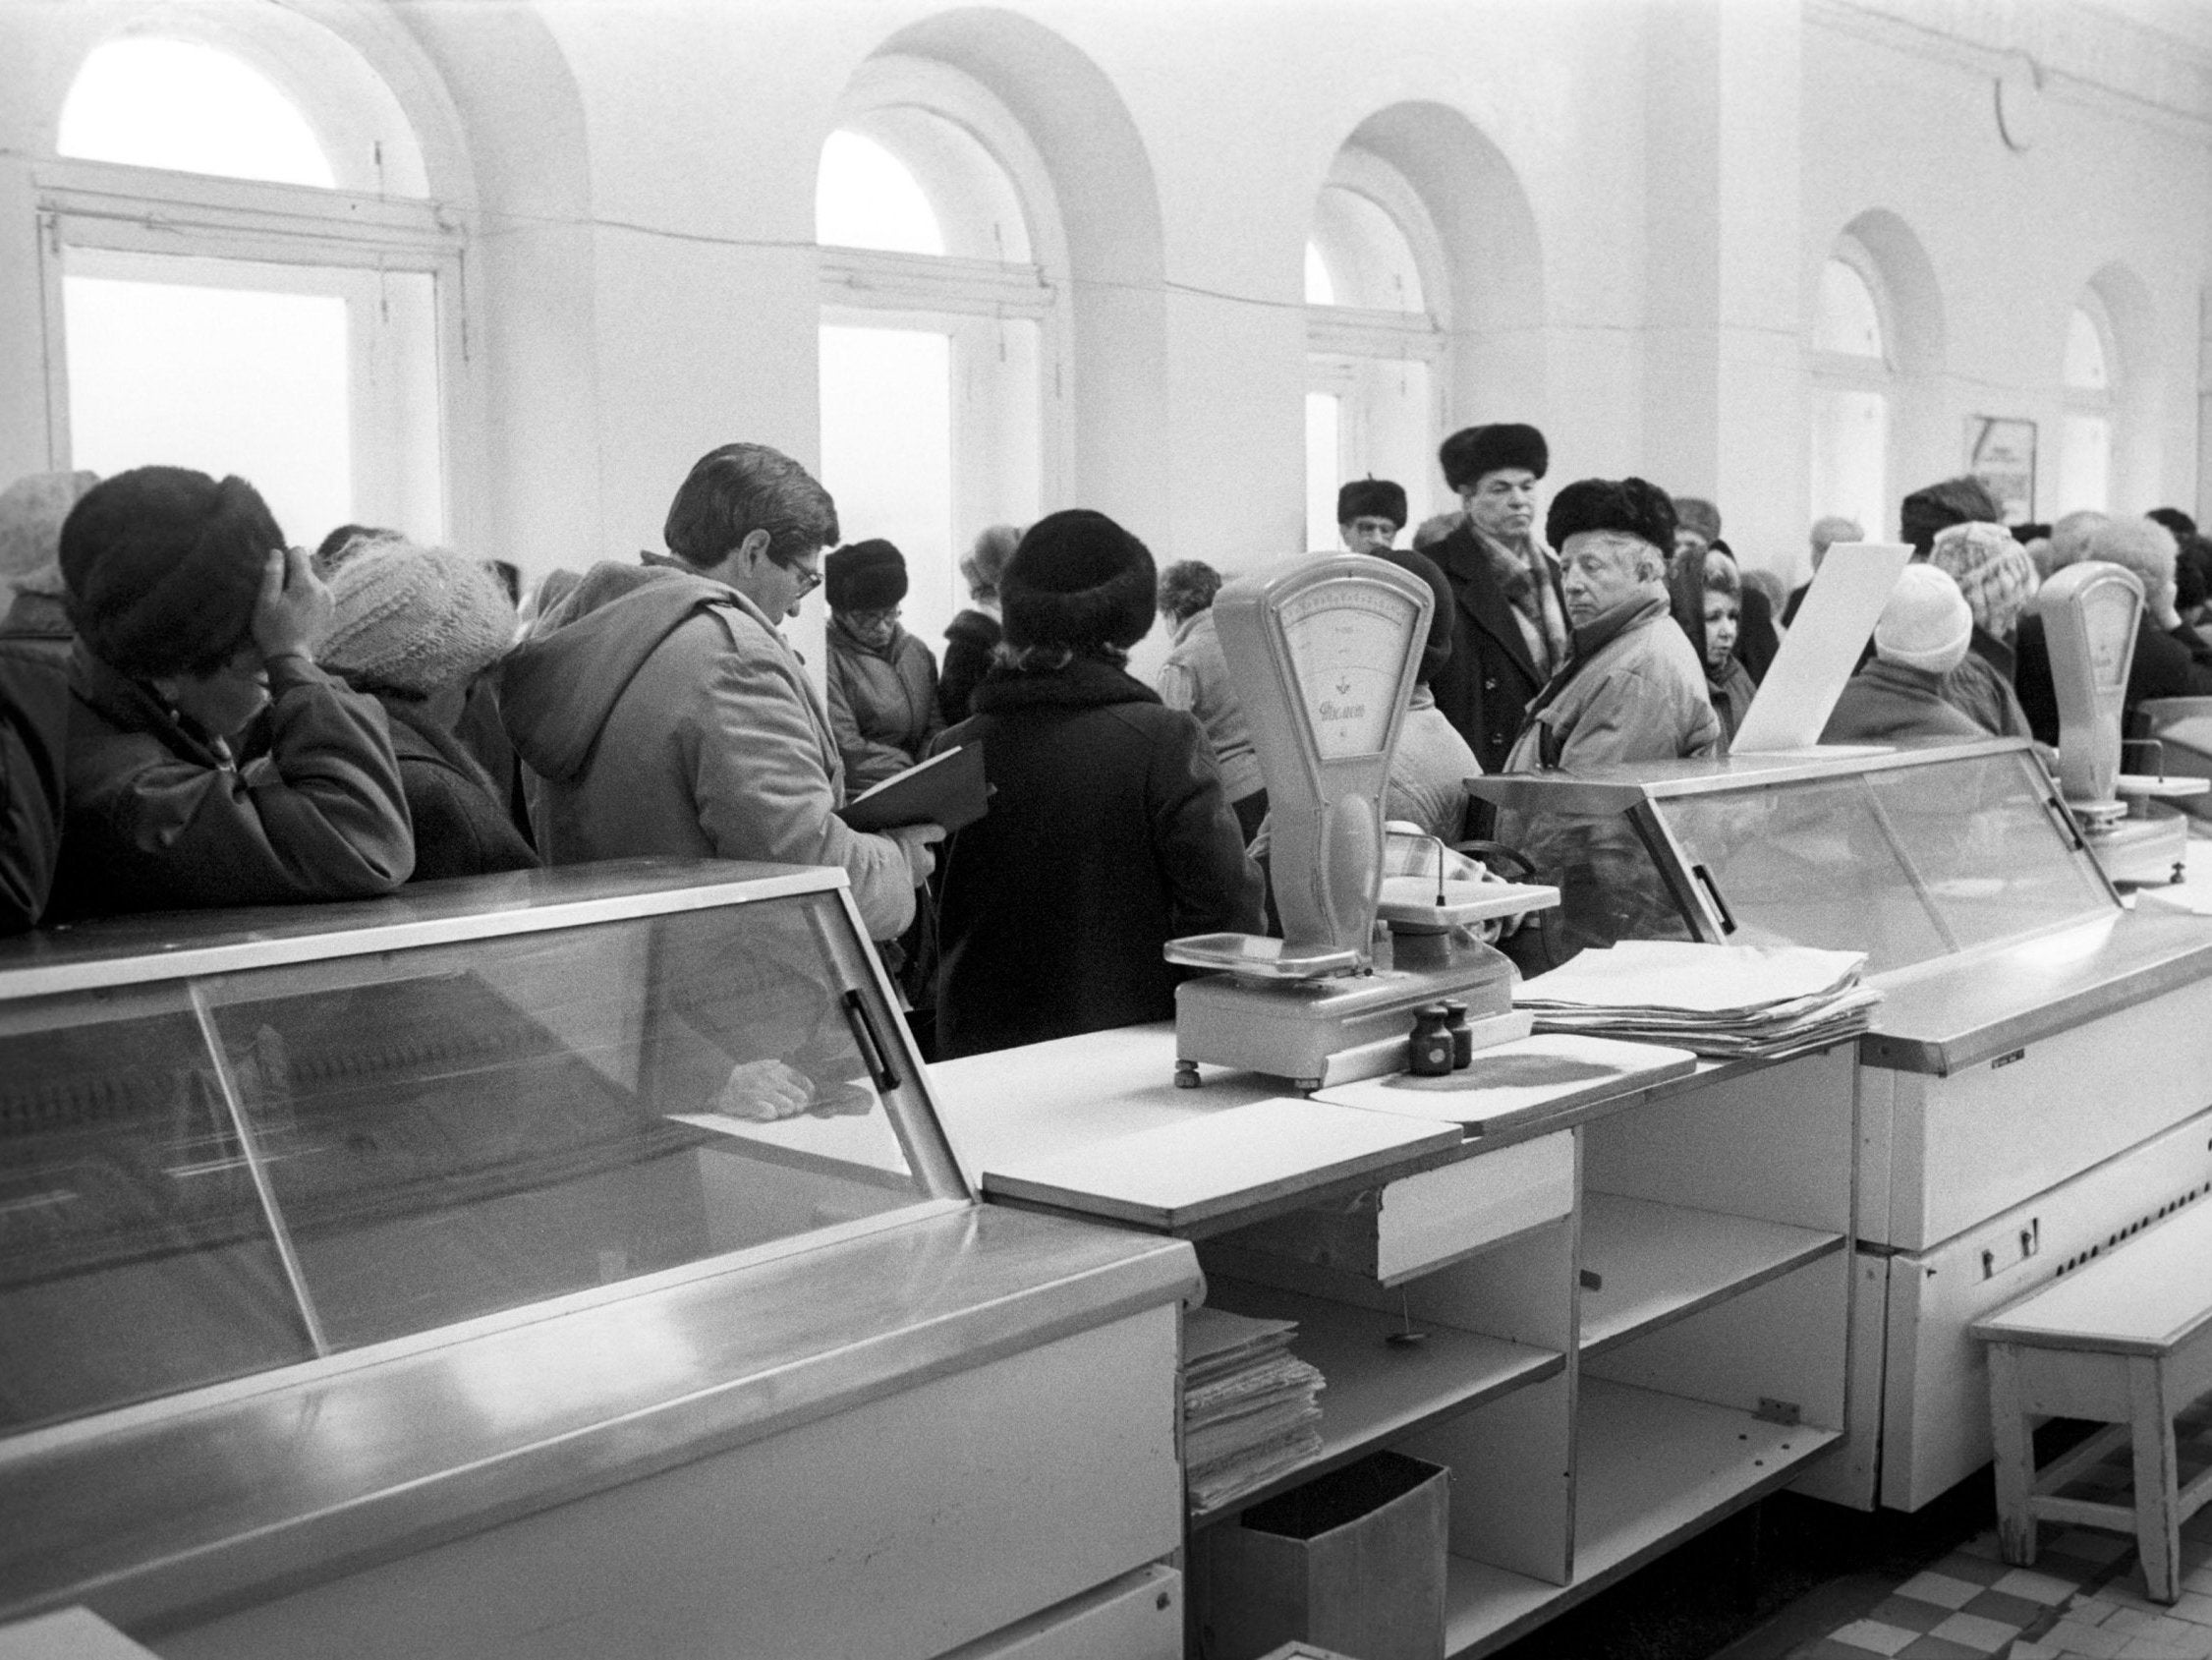 Long queues and near-empty shelves: a Russian shop in 1991, shortly before the end of the Soviet Union